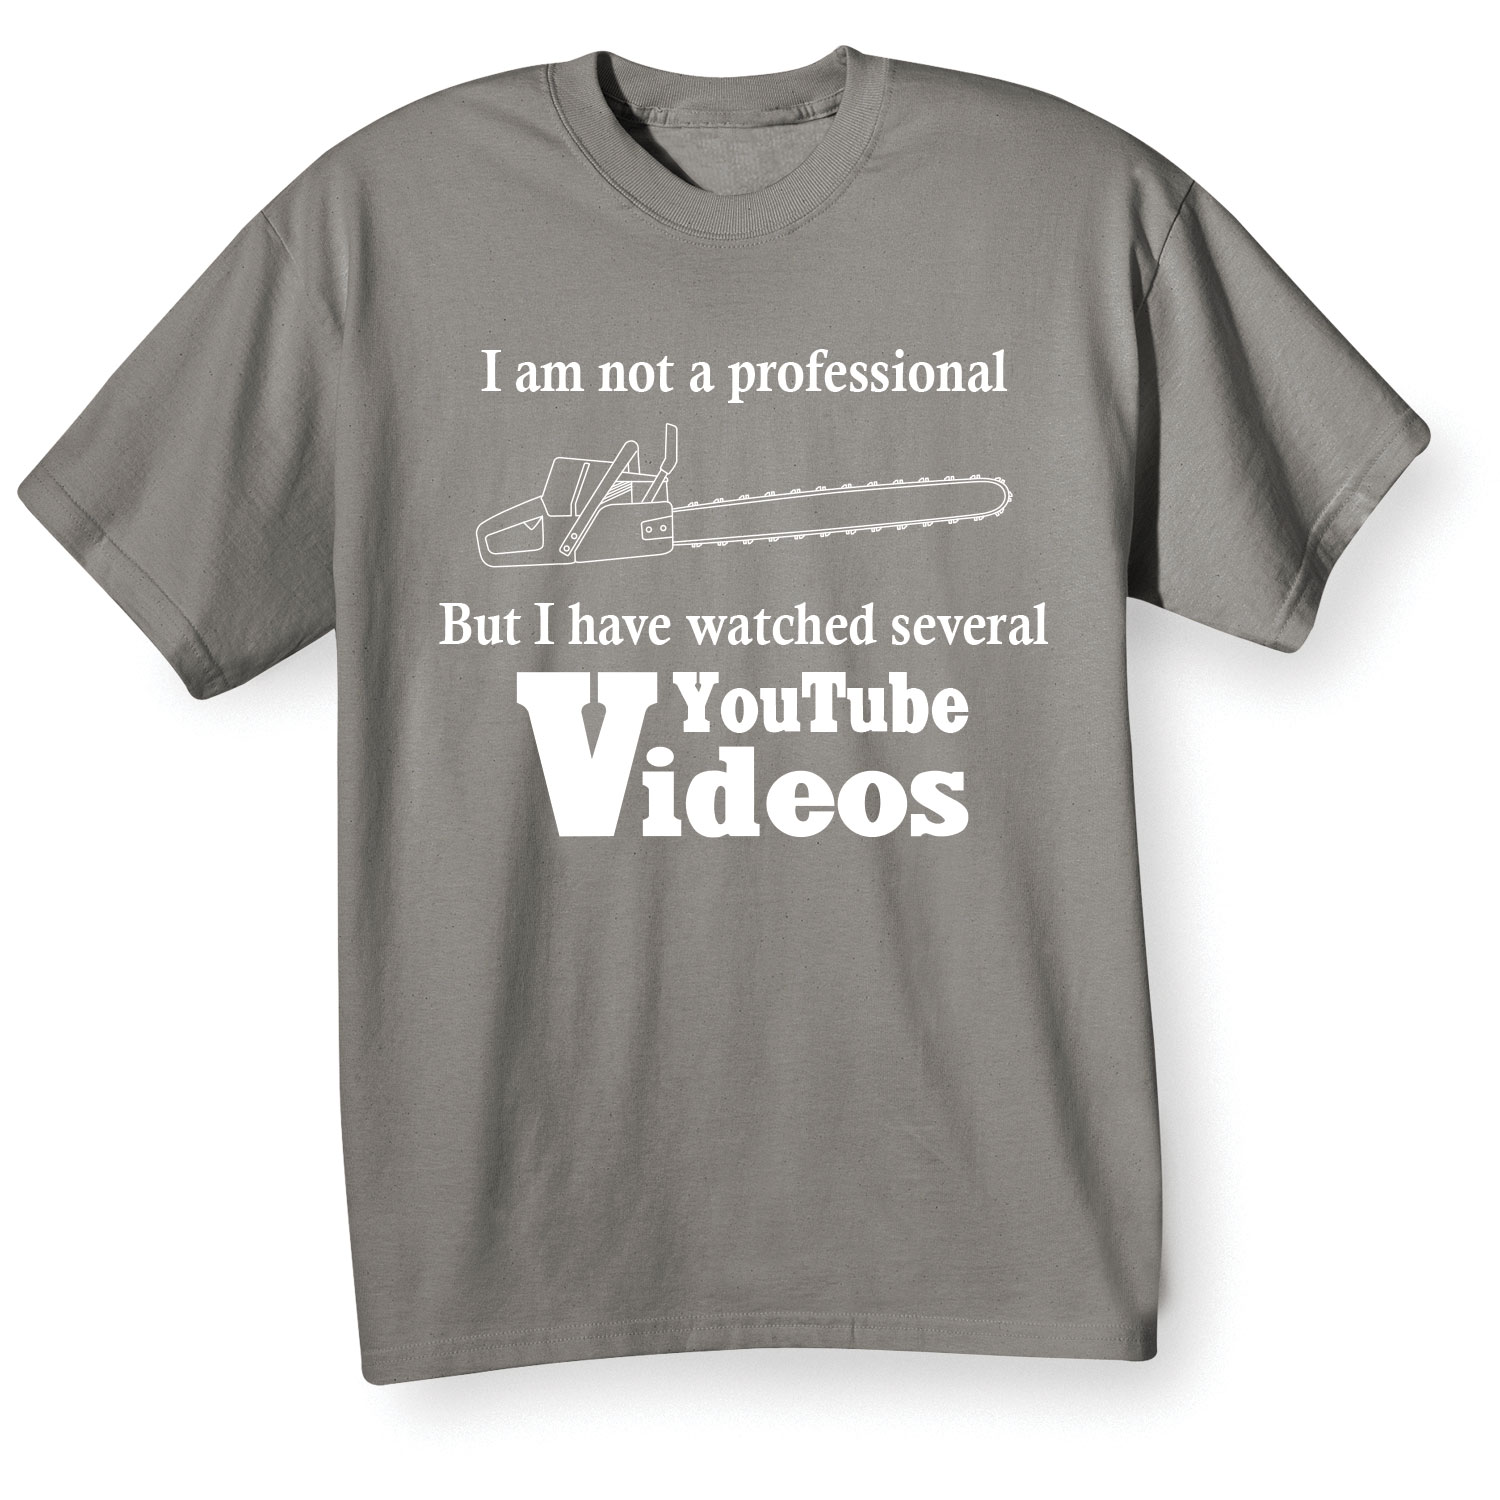 Product image for I Am Not a Professional T-Shirt or Sweatshirt